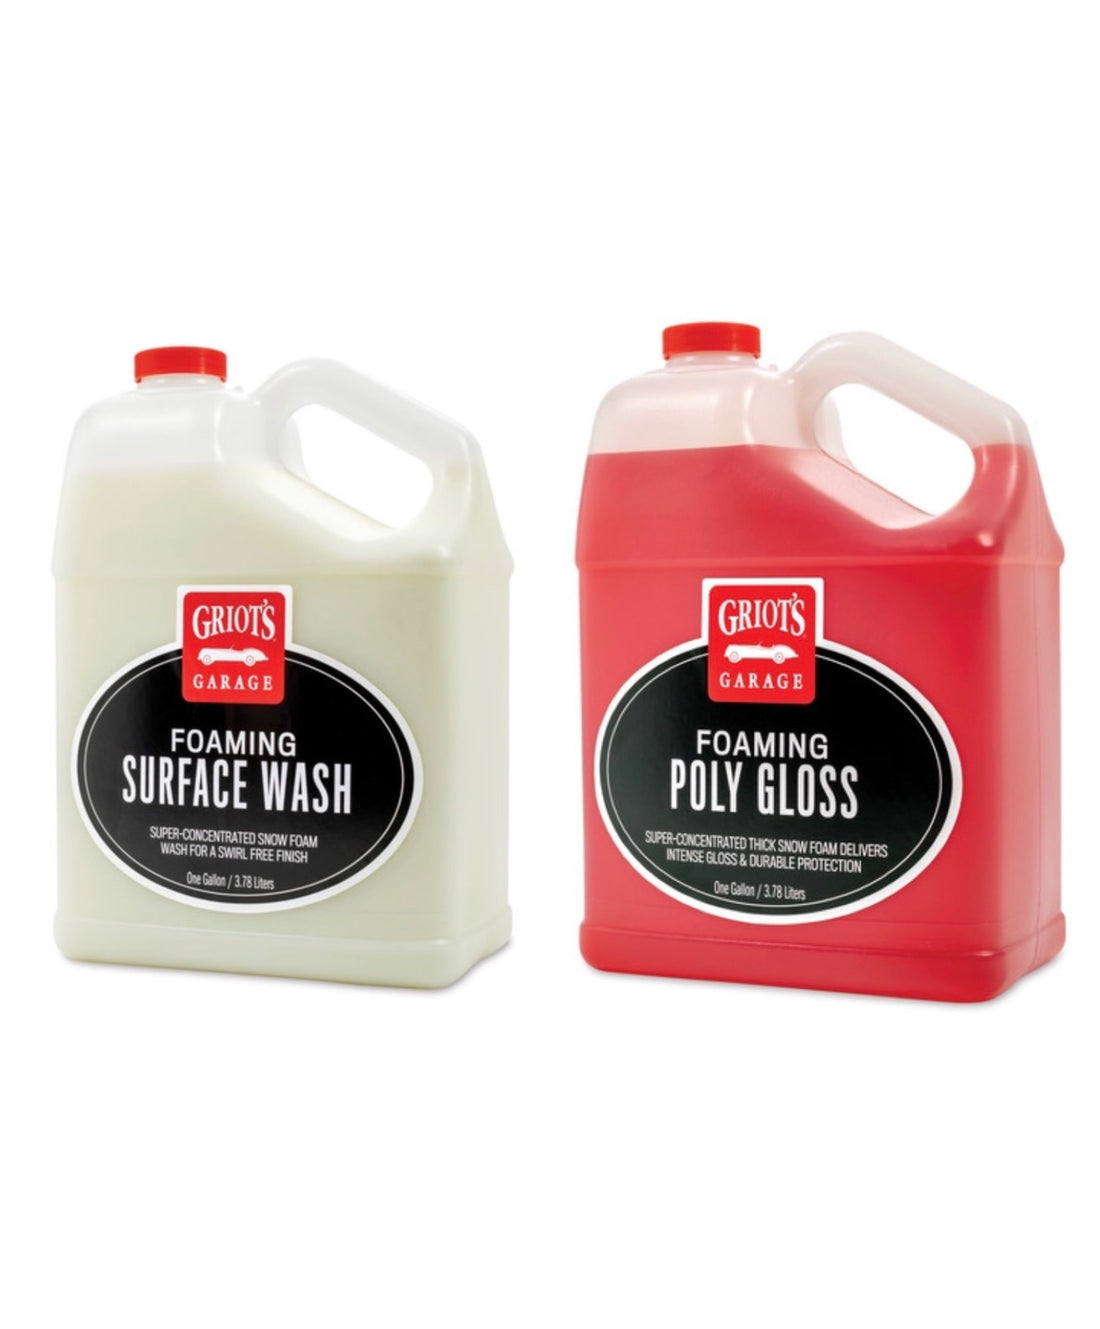 Griot's Garage Foaming Surface Wash and Foaming Poly Gloss 128OZ Kit - Detailing Connect